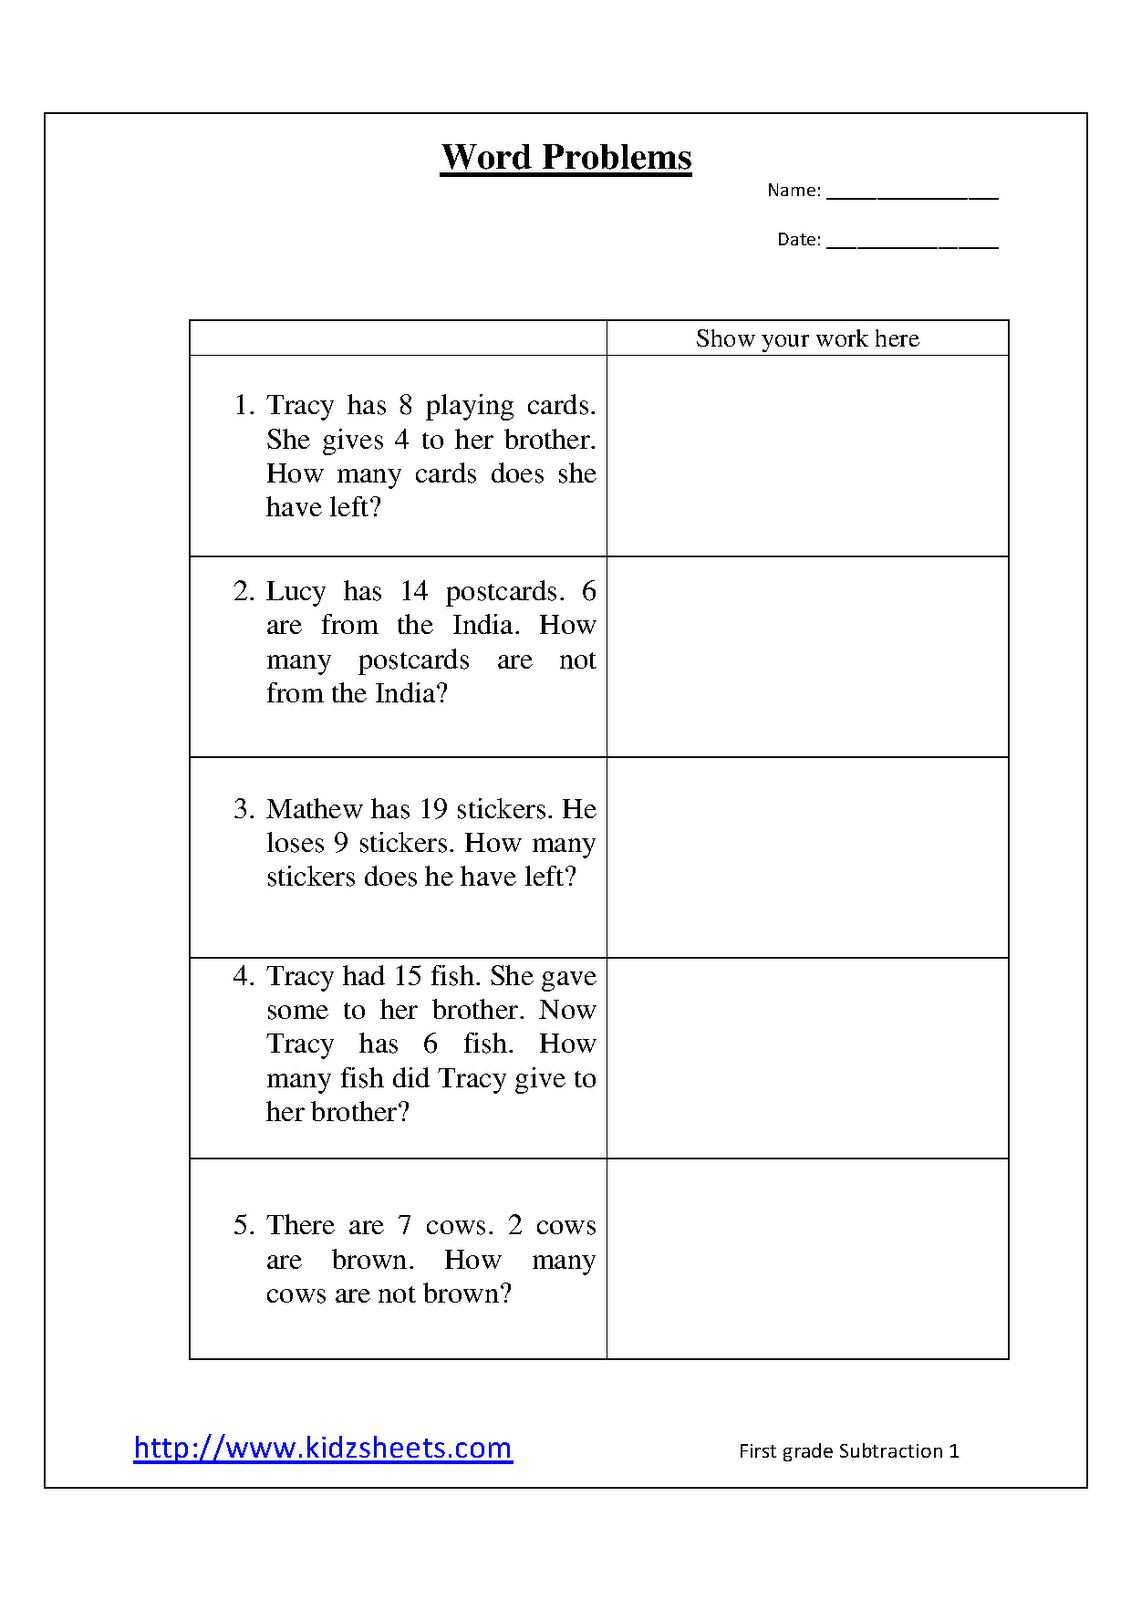 15 Best Images Of Worksheets Word Problems Part 2 Subtraction Word Problems Worksheets